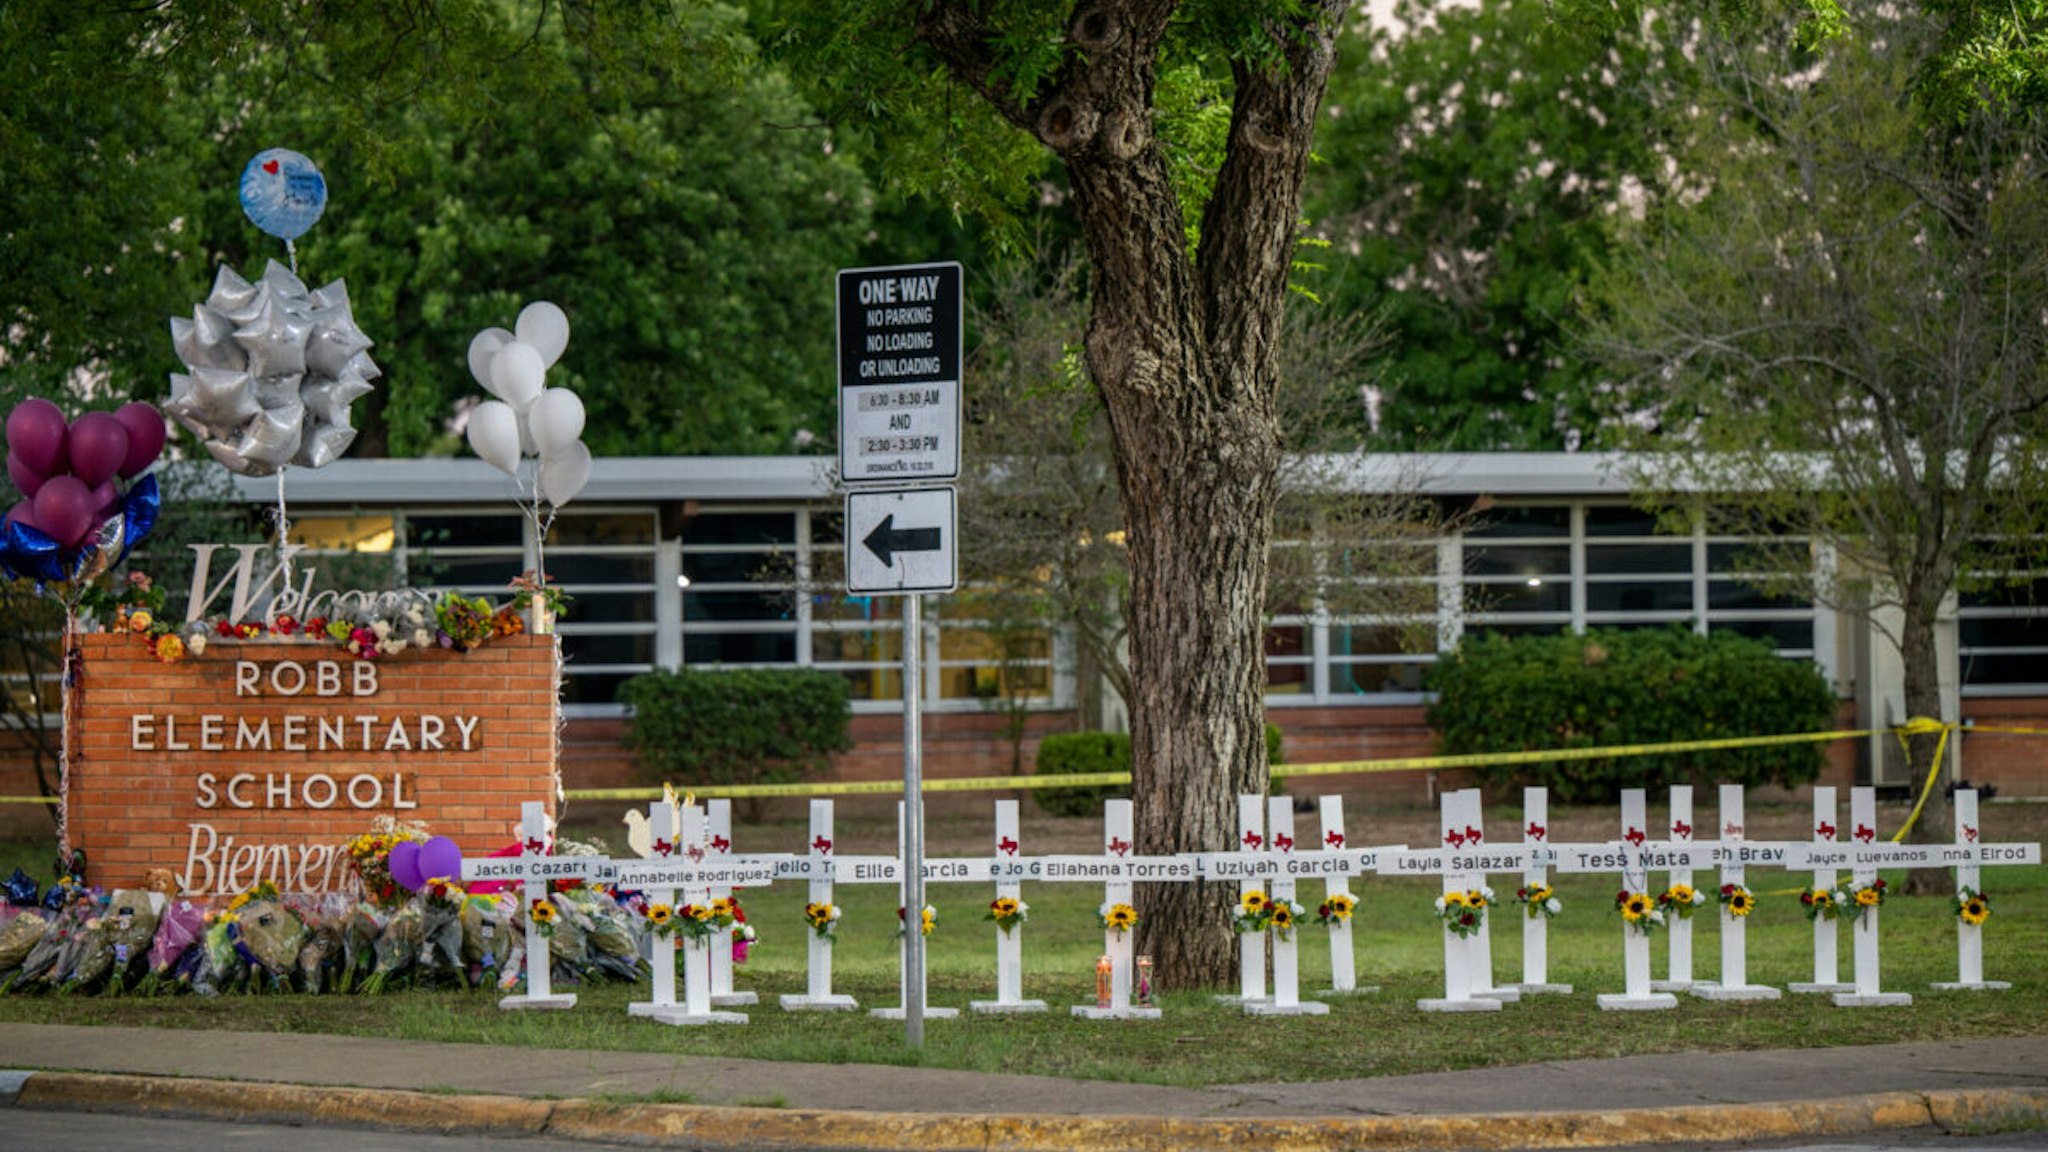 A memorial is seen surrounding the Robb Elementary School sign following the mass shooting at Robb Elementary School on May 26, 2022 in Uvalde, Texas